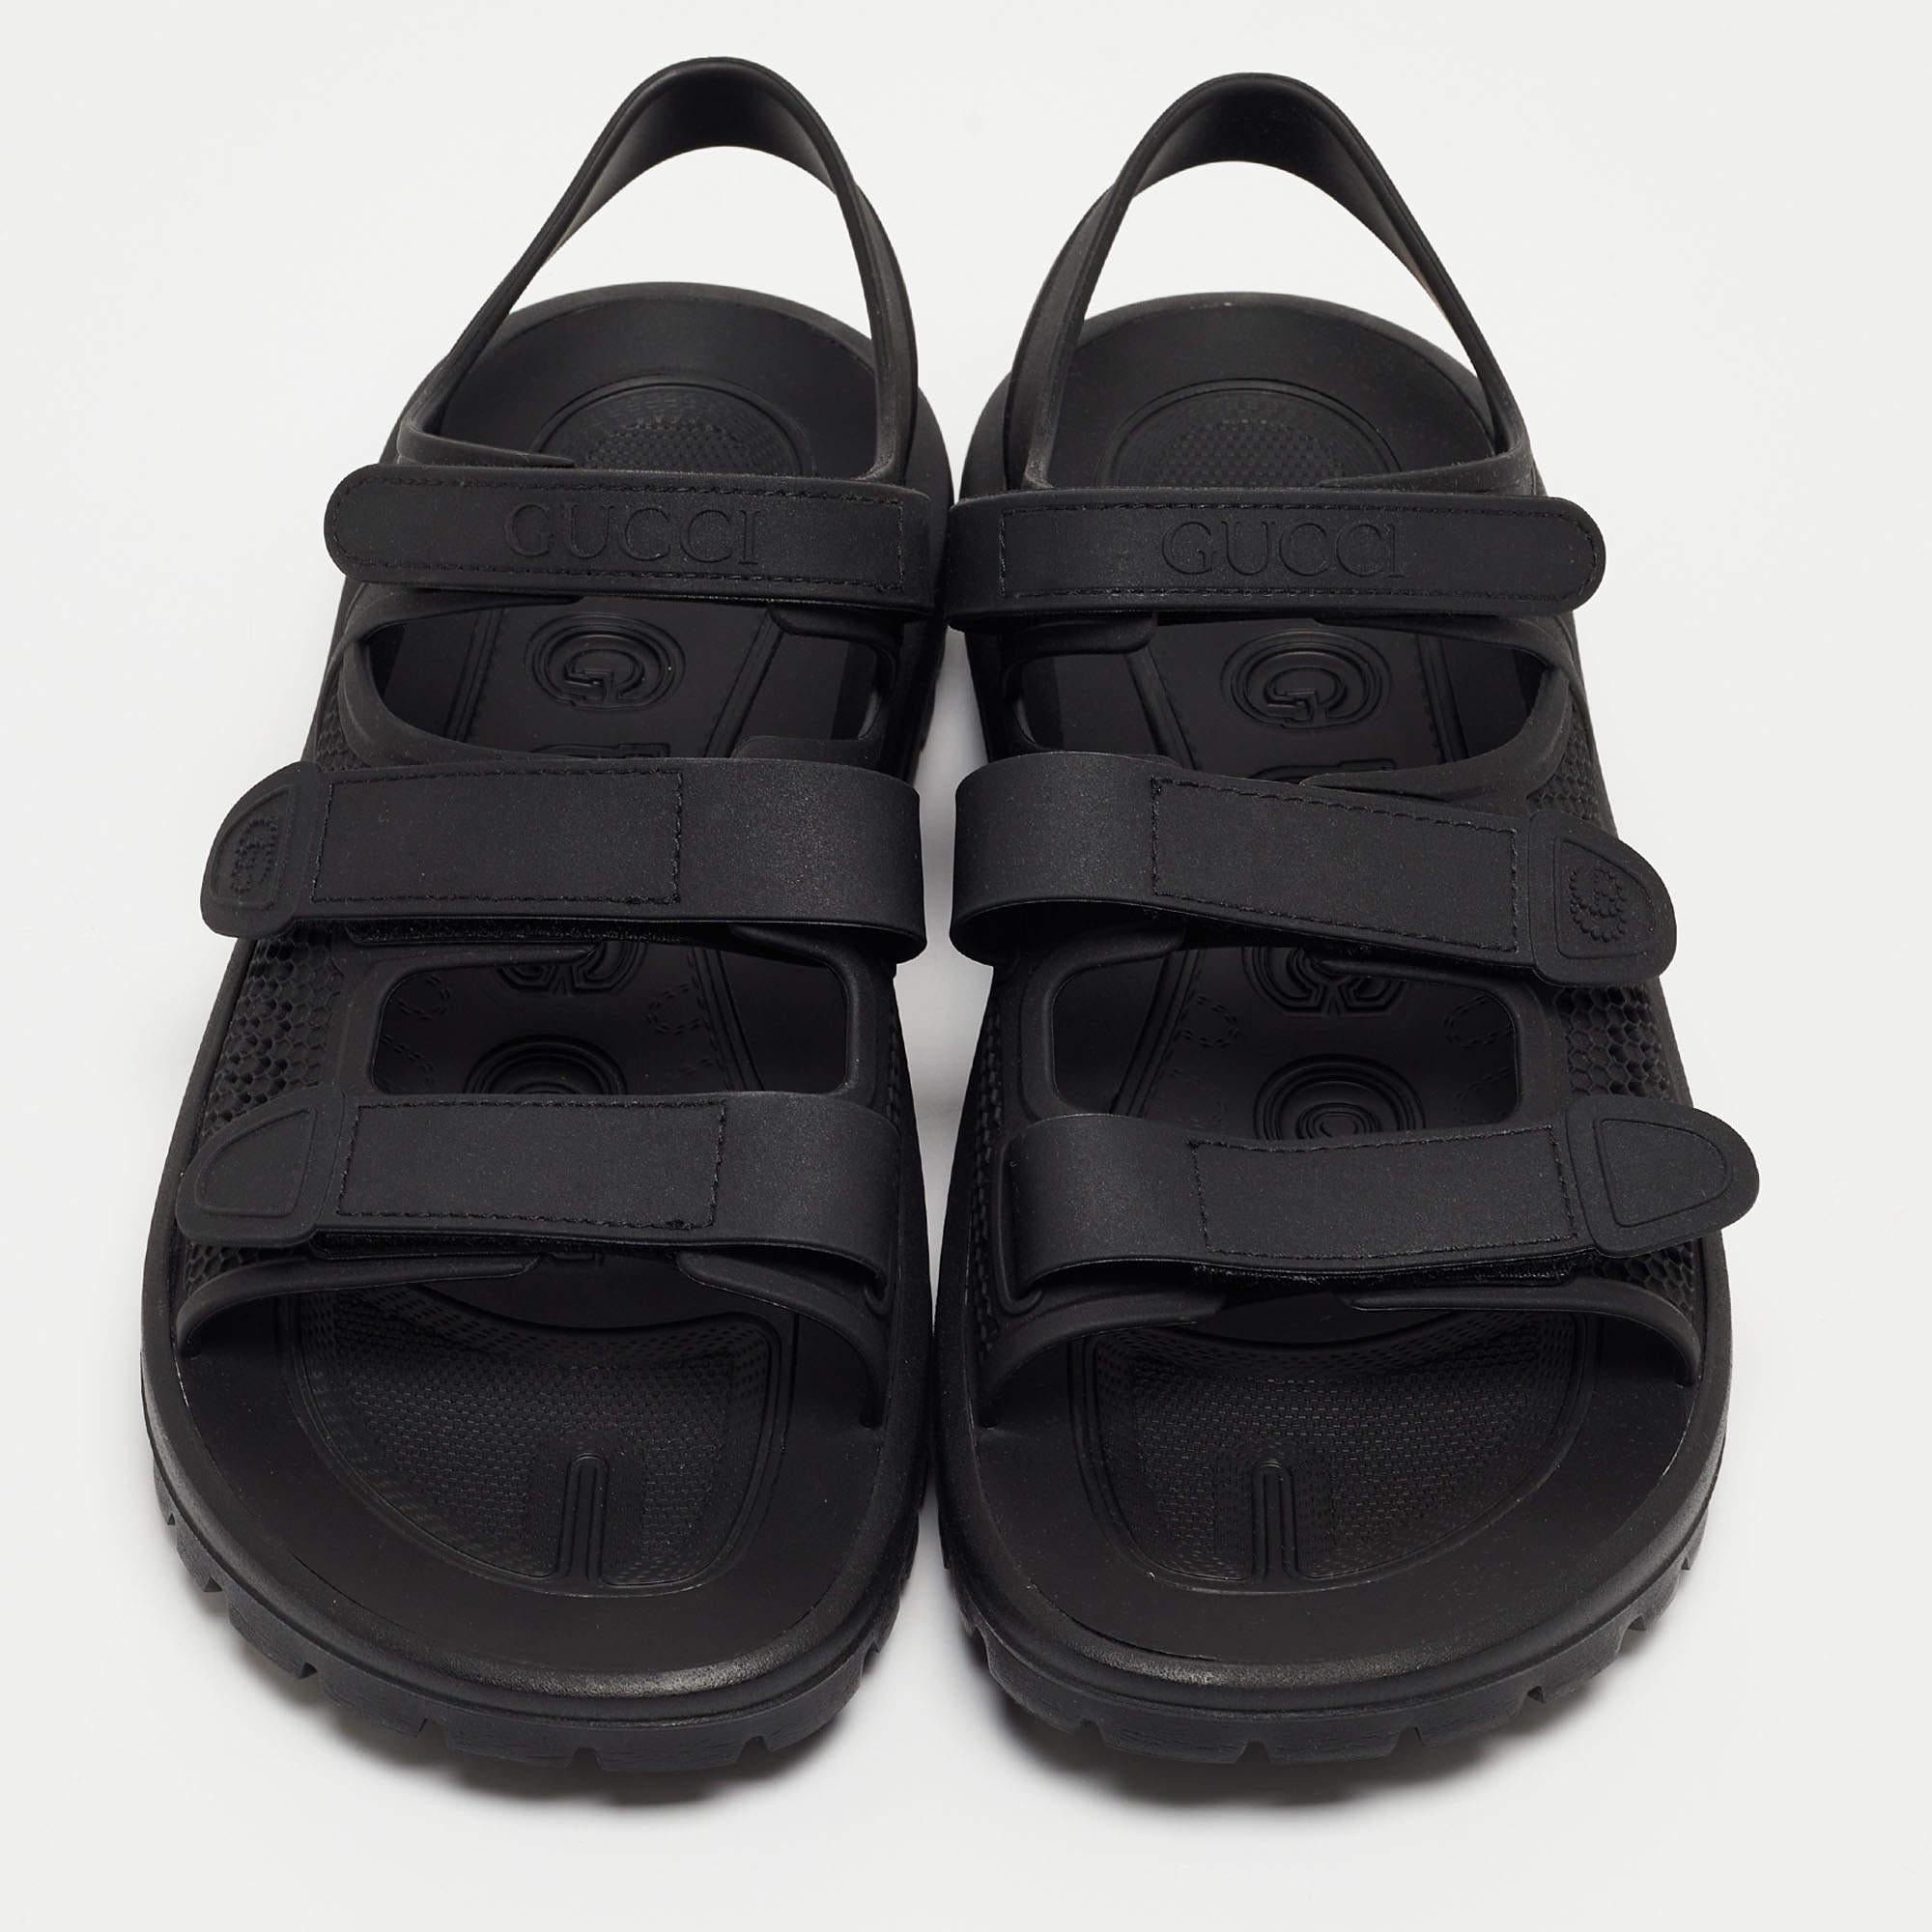 Gucci Black Honeycomb Rubber Flat Sandals Size 44 For Sale 1